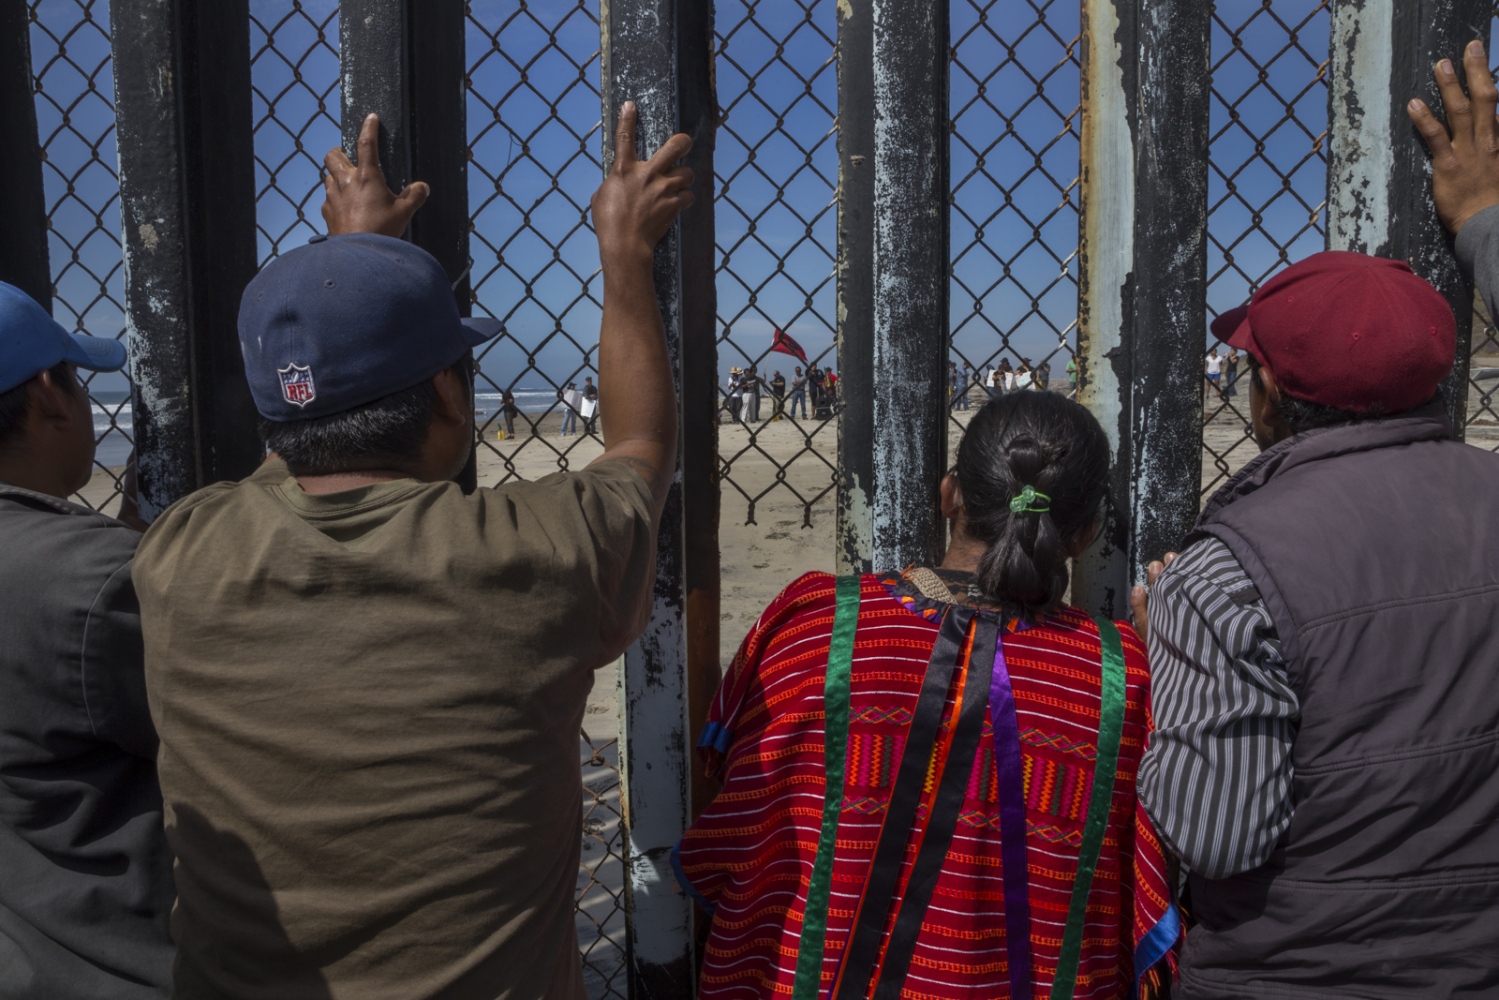 The Wall - Farmworkers from Mexico’s San Quintin valley...